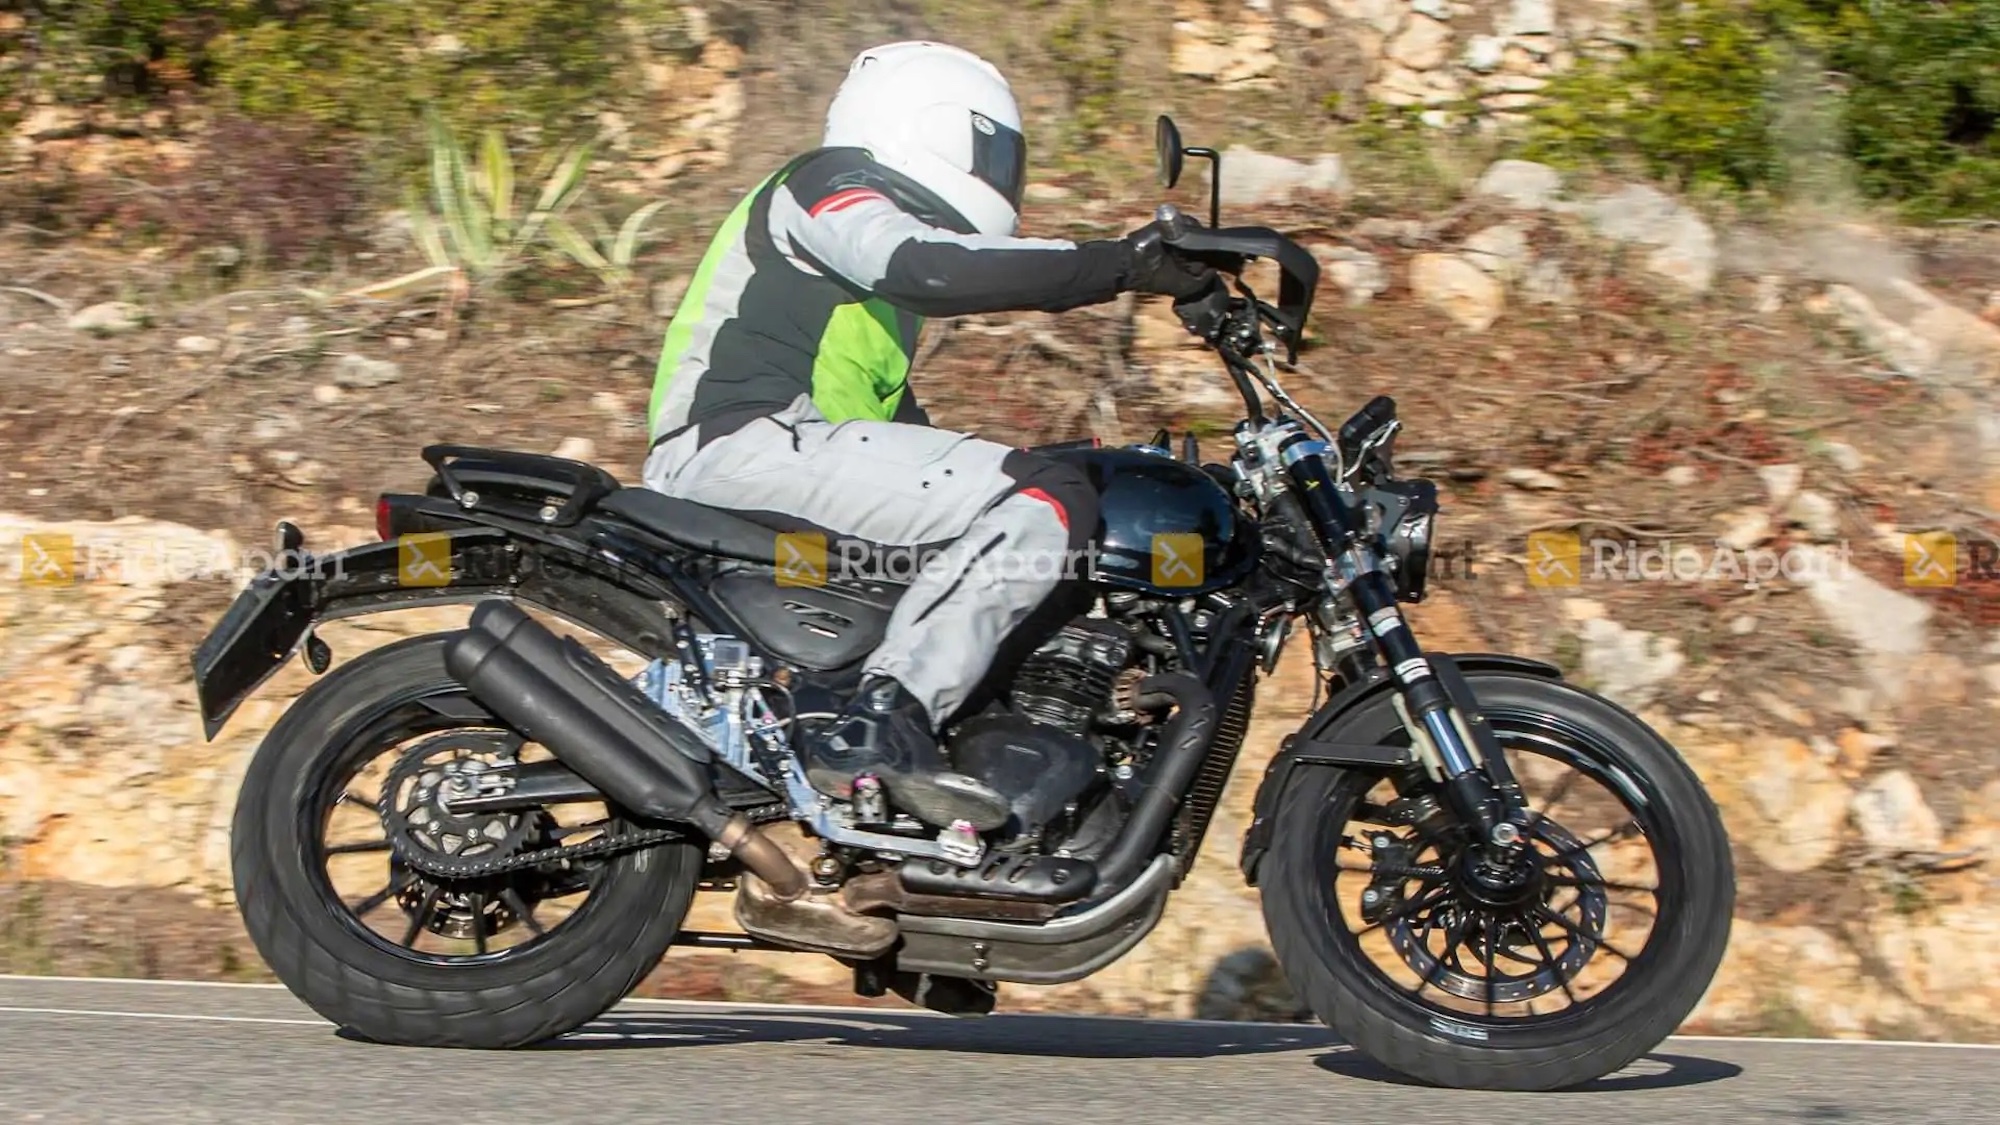 A rider testing out a new unit from Triumph-Bajaj. Media sourced from RideApart.